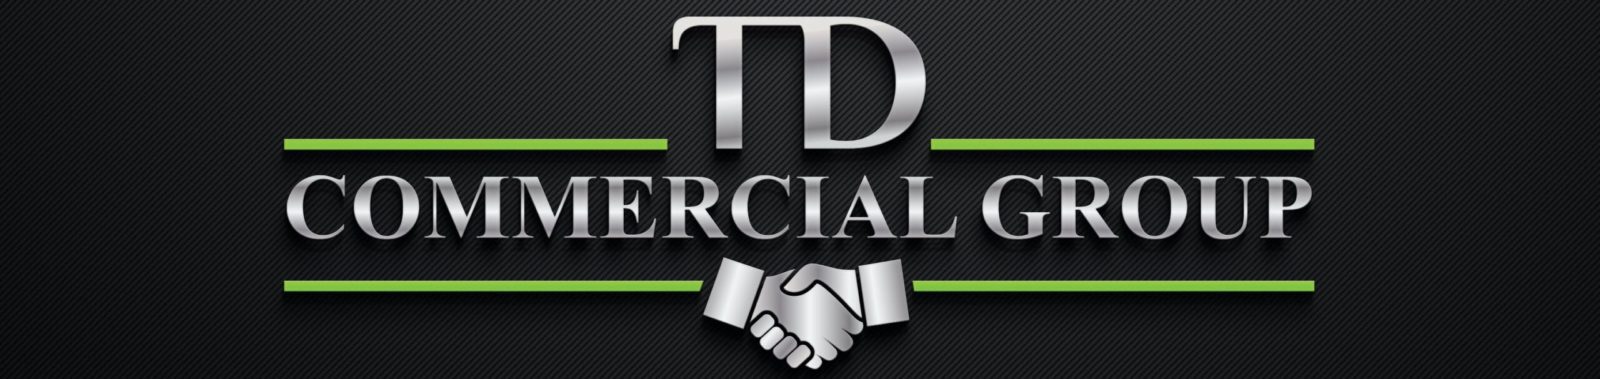 email markeitng for TD commercial group south florida